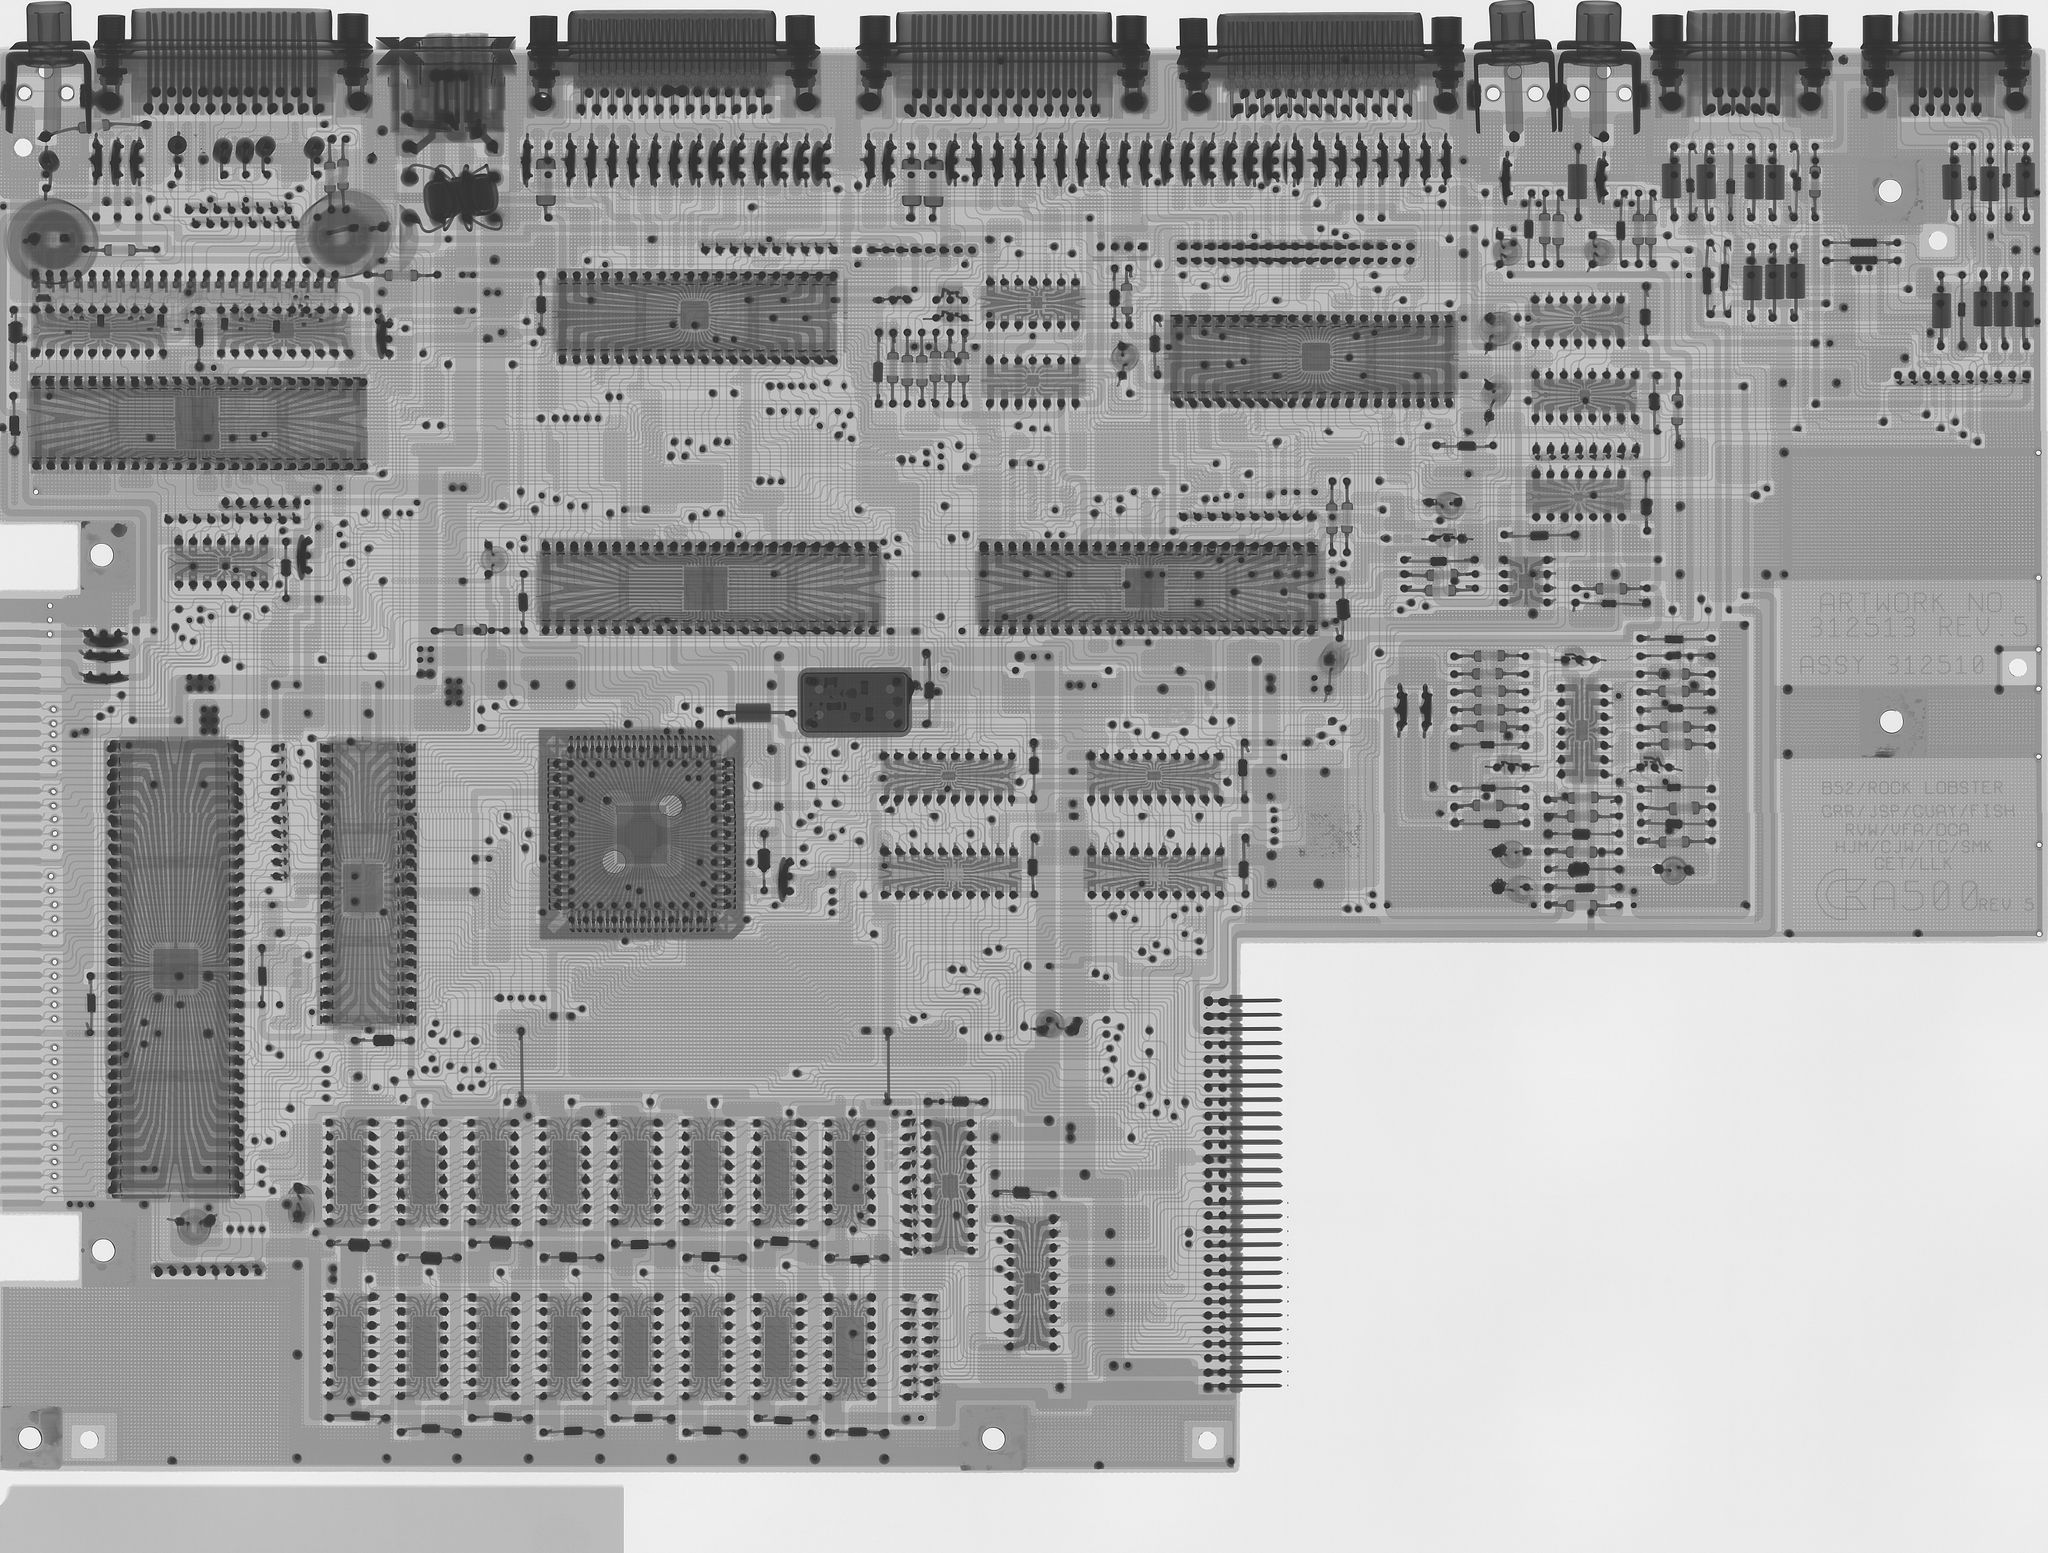 The ultimate Amiga 500 motherboard checkup courtesy of an X-Ray